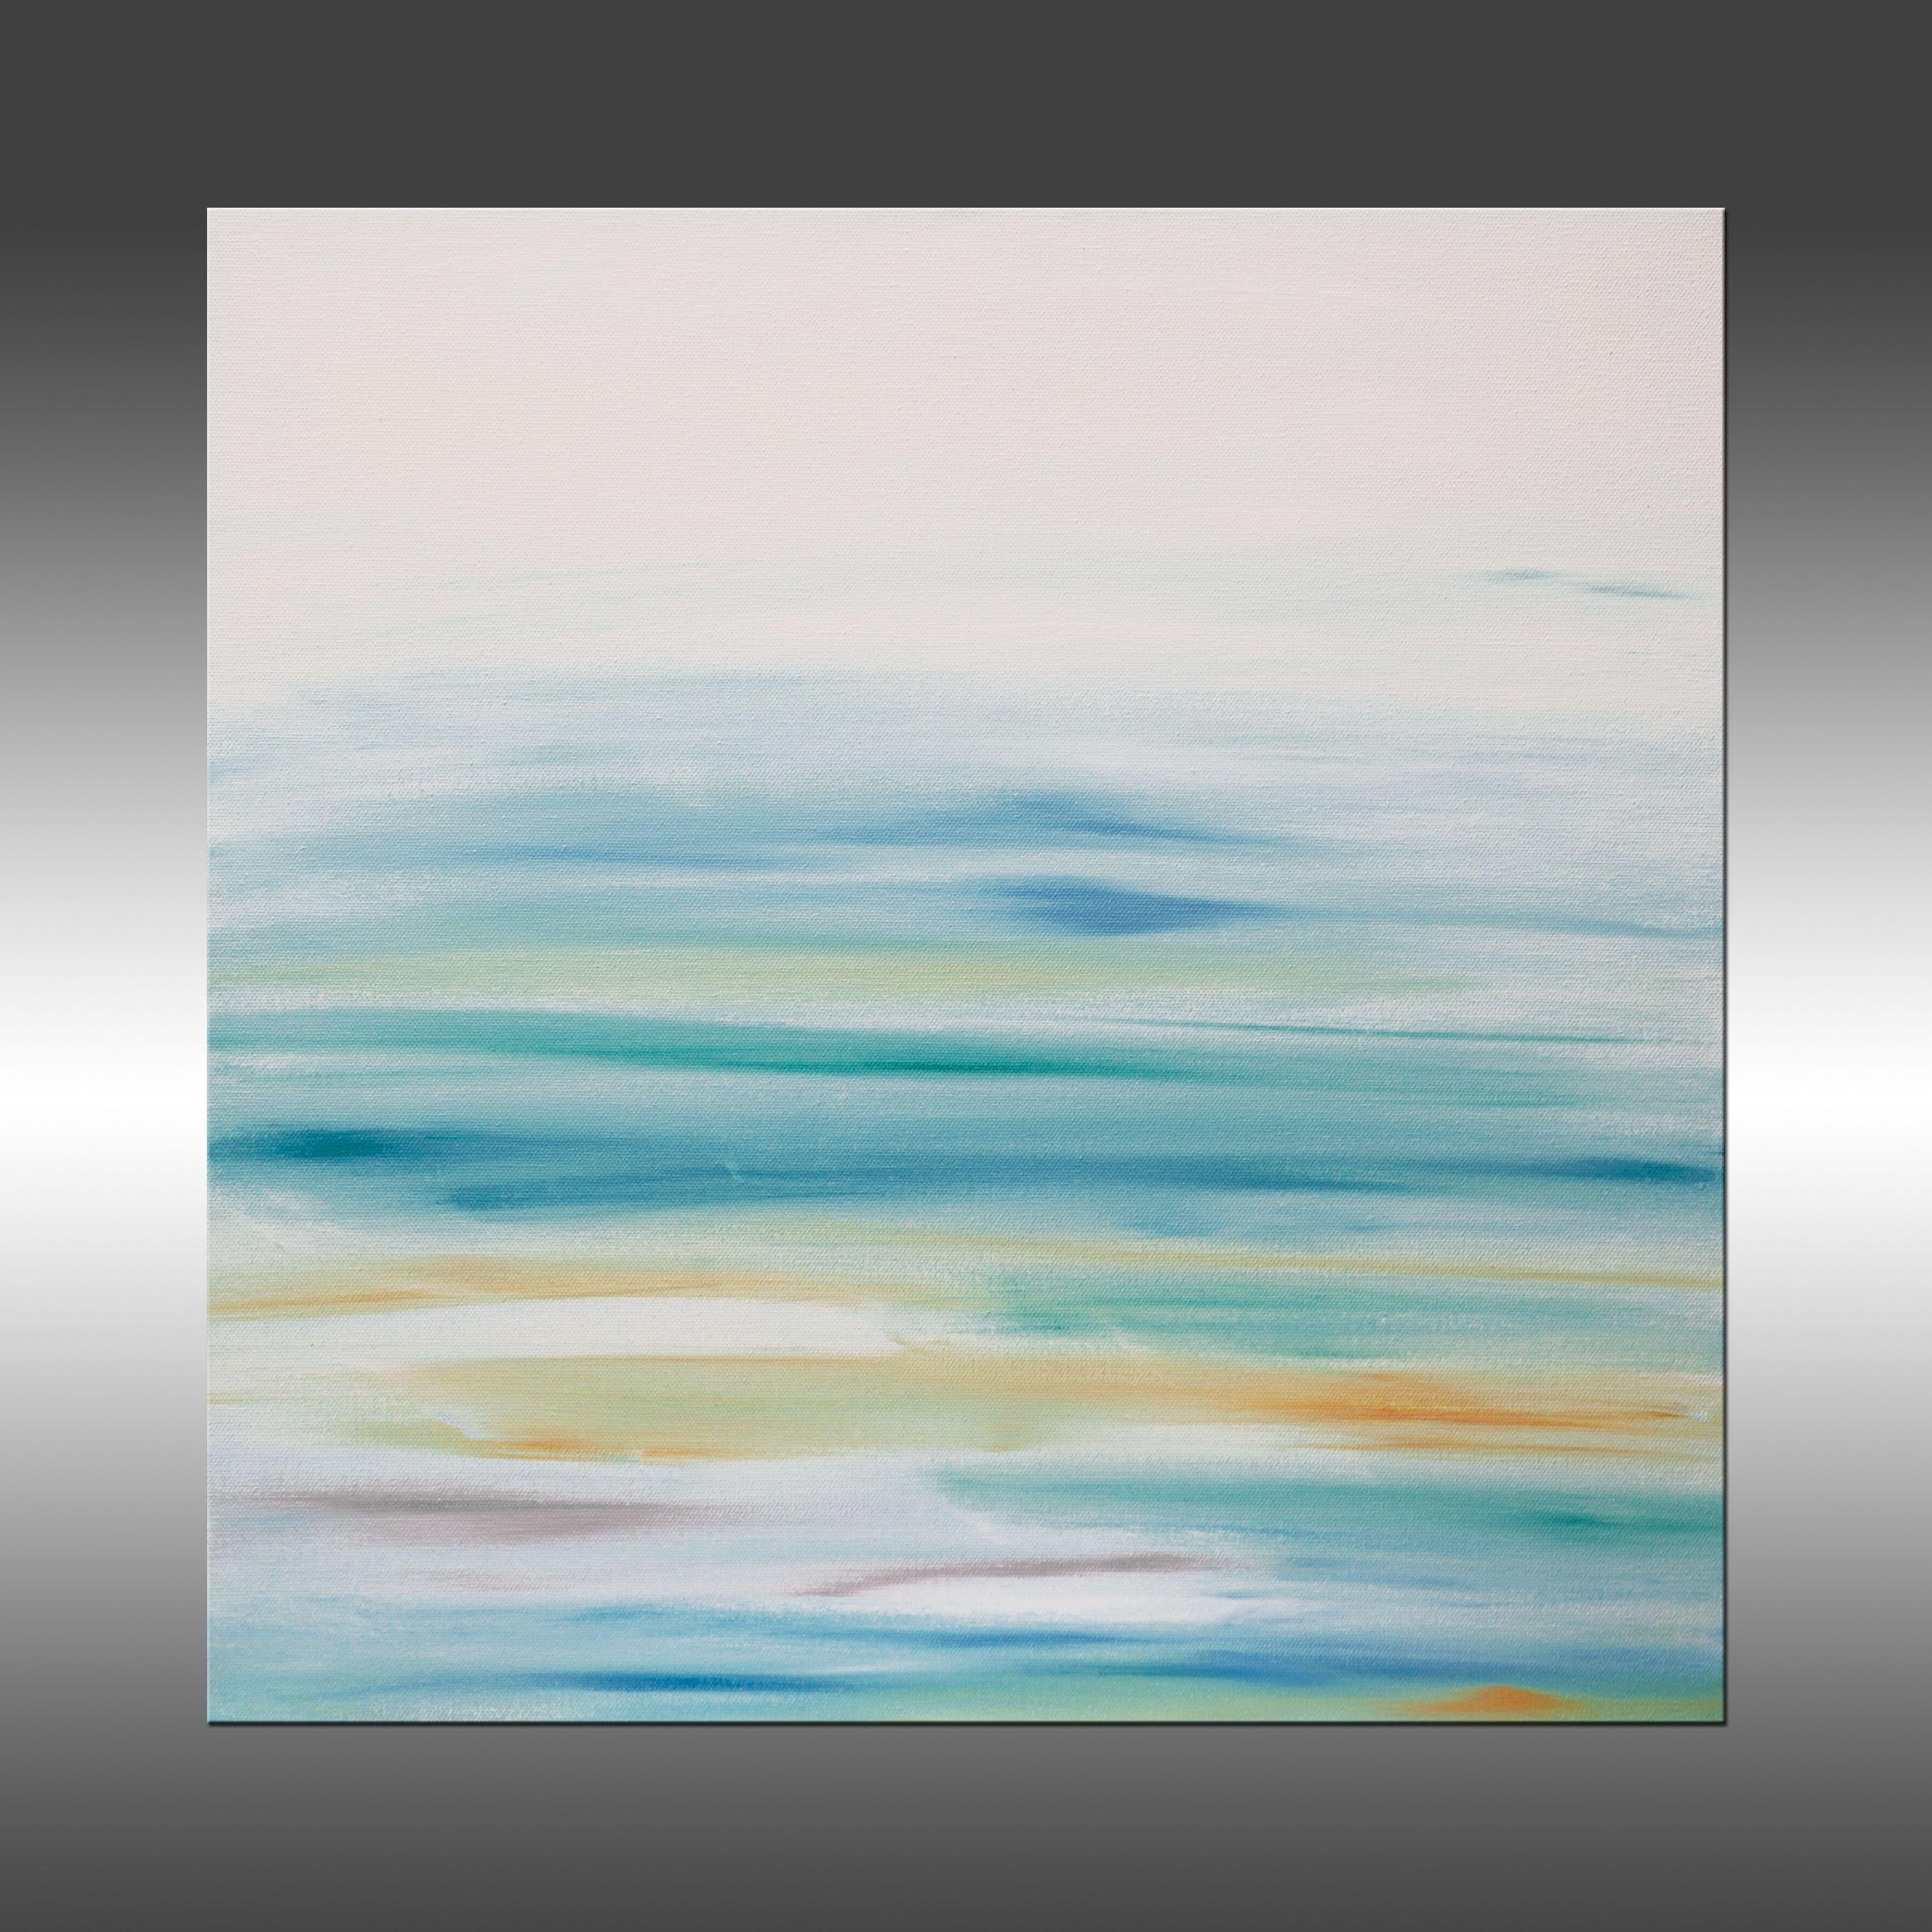 Sunset 67 is an original painting, created with acrylic paint on gallery-wrapped canvas. It has a width of 20 inches and a height of 20 inches with a depth of 1.5 inches (20x20x1.5).    The colors used in the painting are white, blue, teal, gold,